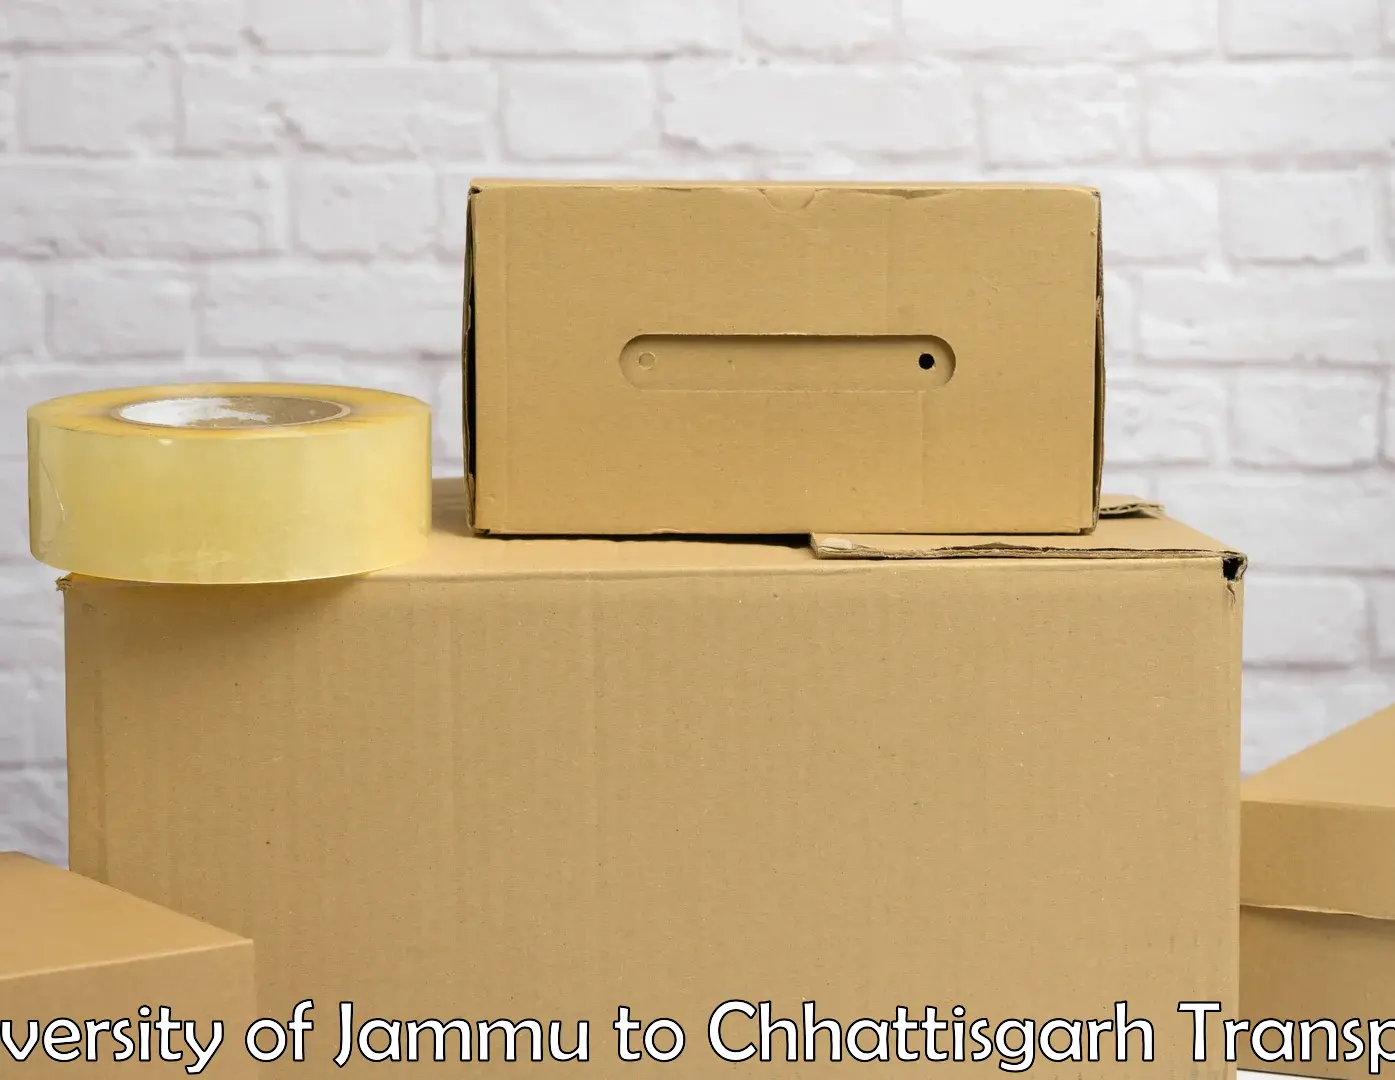 Best transport services in India University of Jammu to Raipur